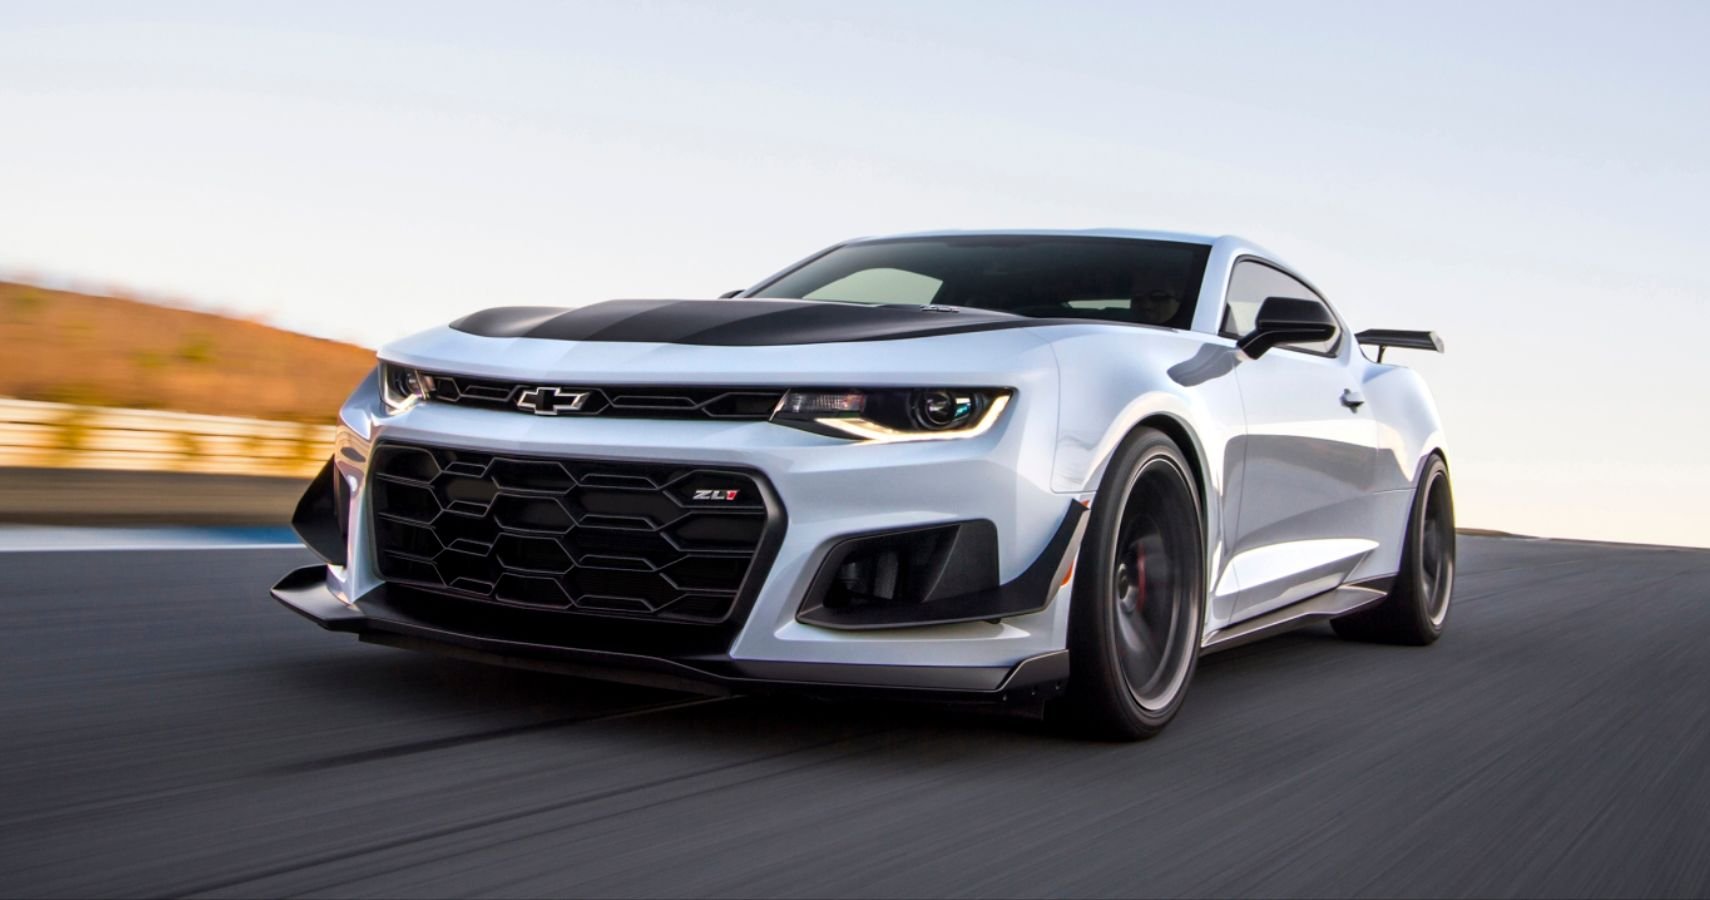 A Final Edition Chevrolet Camaro Could Be Coming In 2024